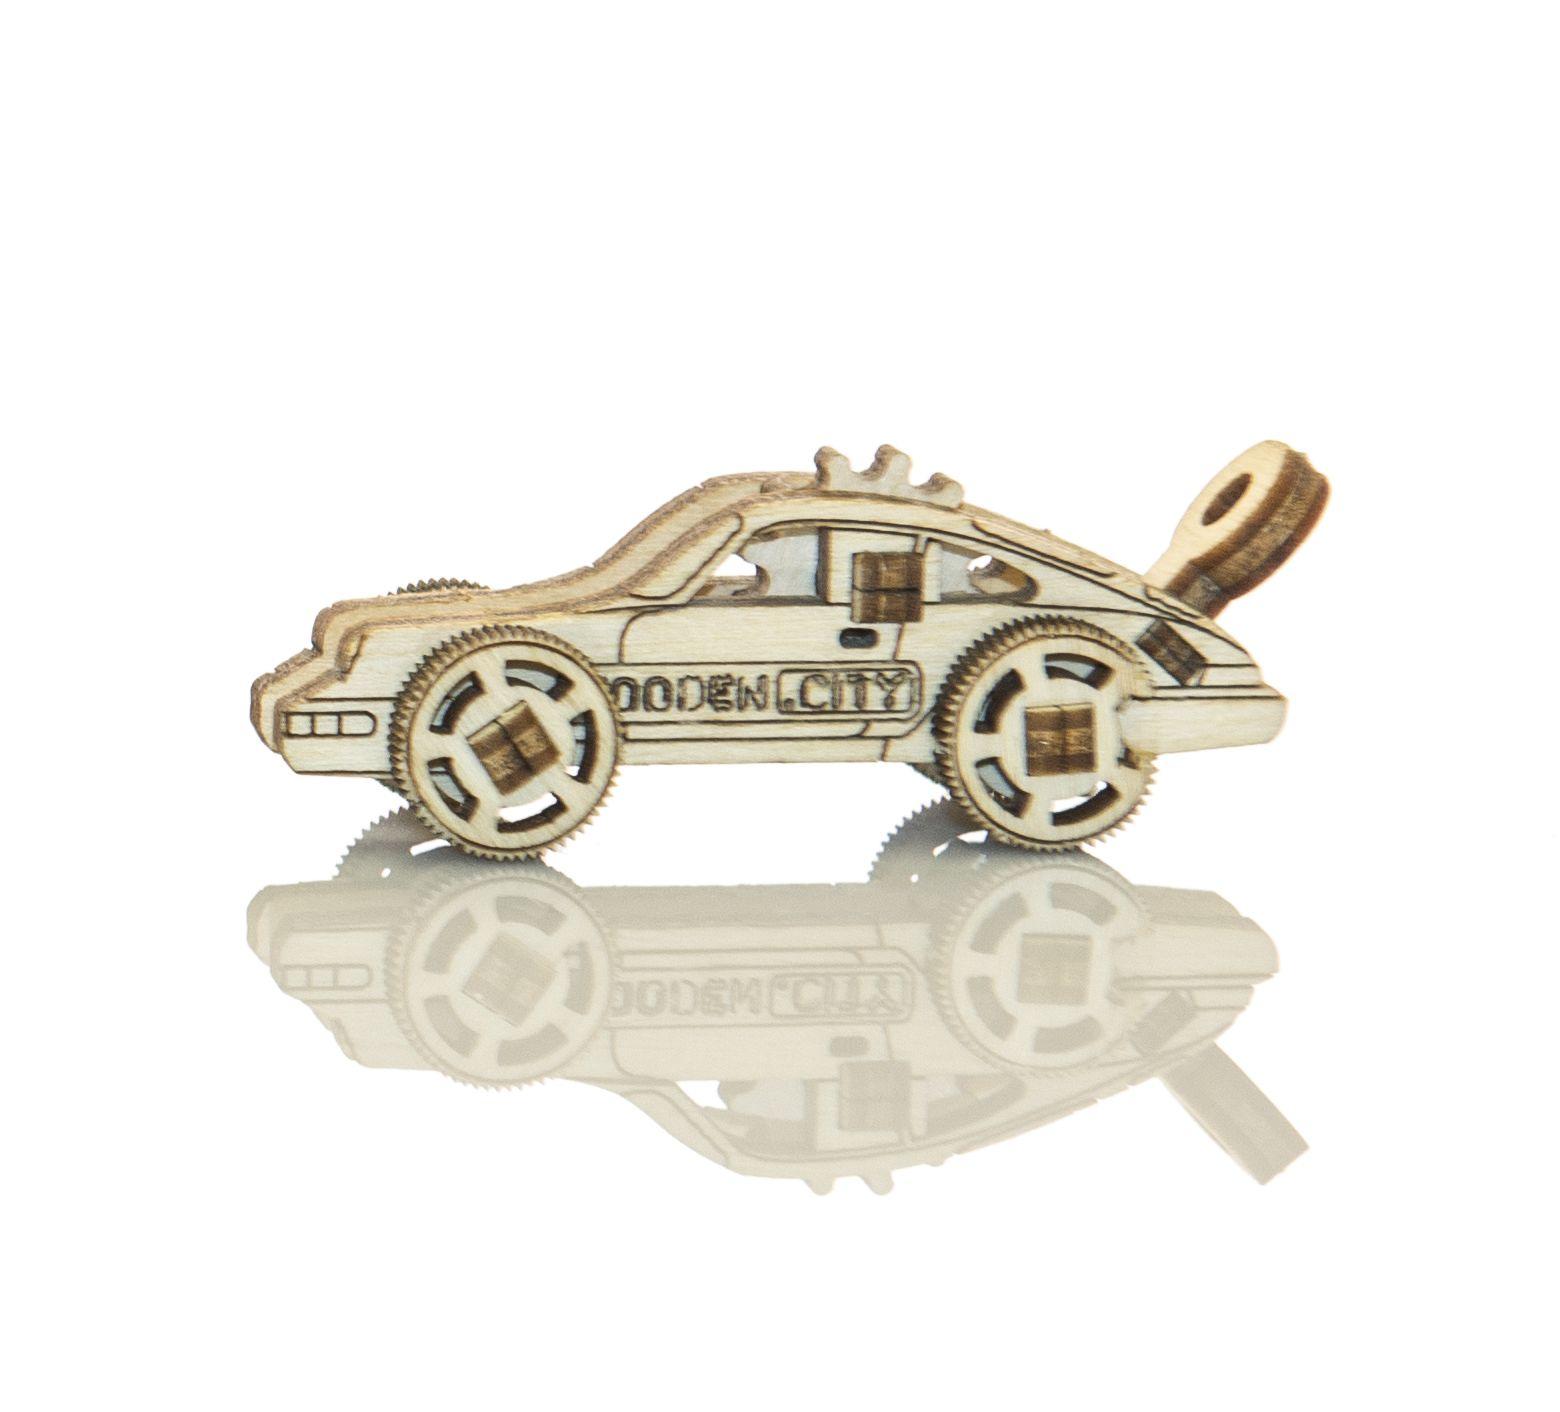 Wooden 3D Puzzle - Sports Cars